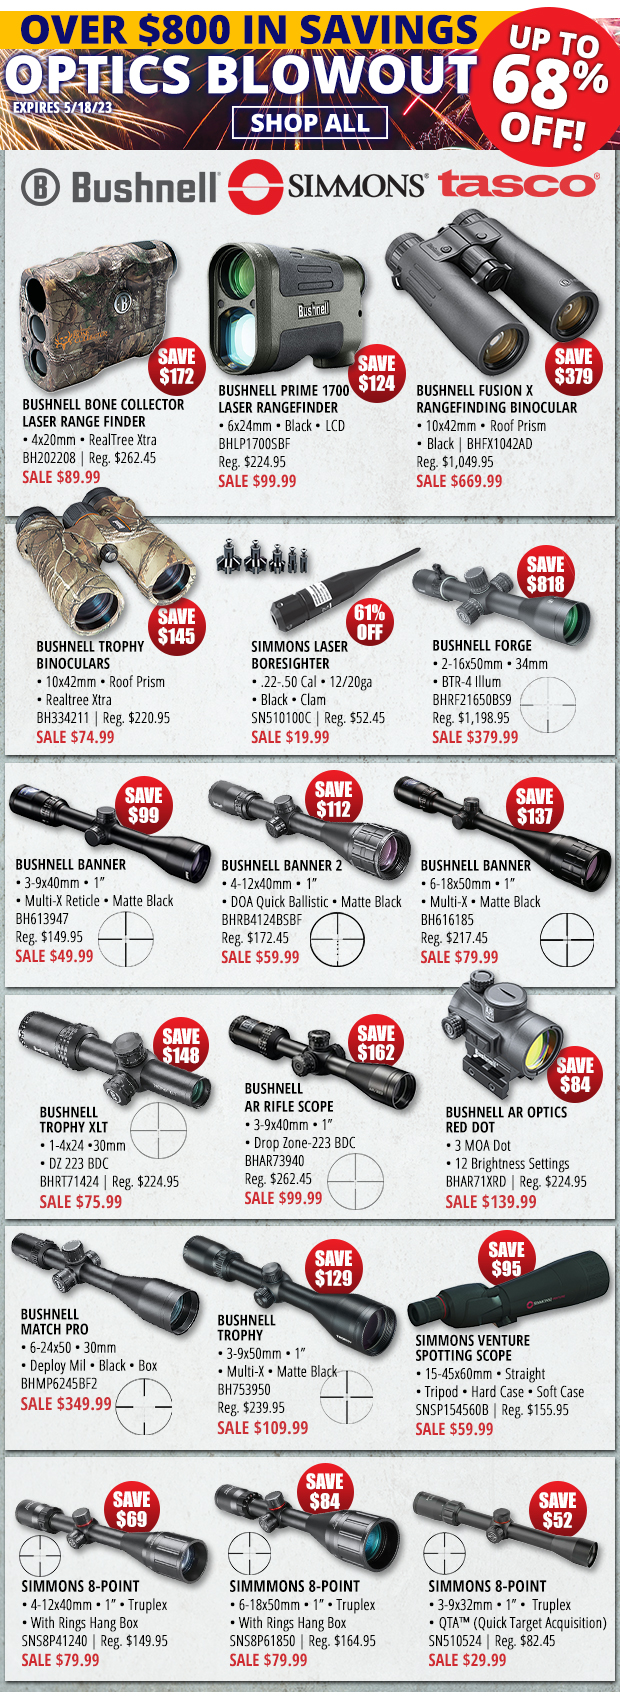 Optics Blowout with Over $800 in Savings